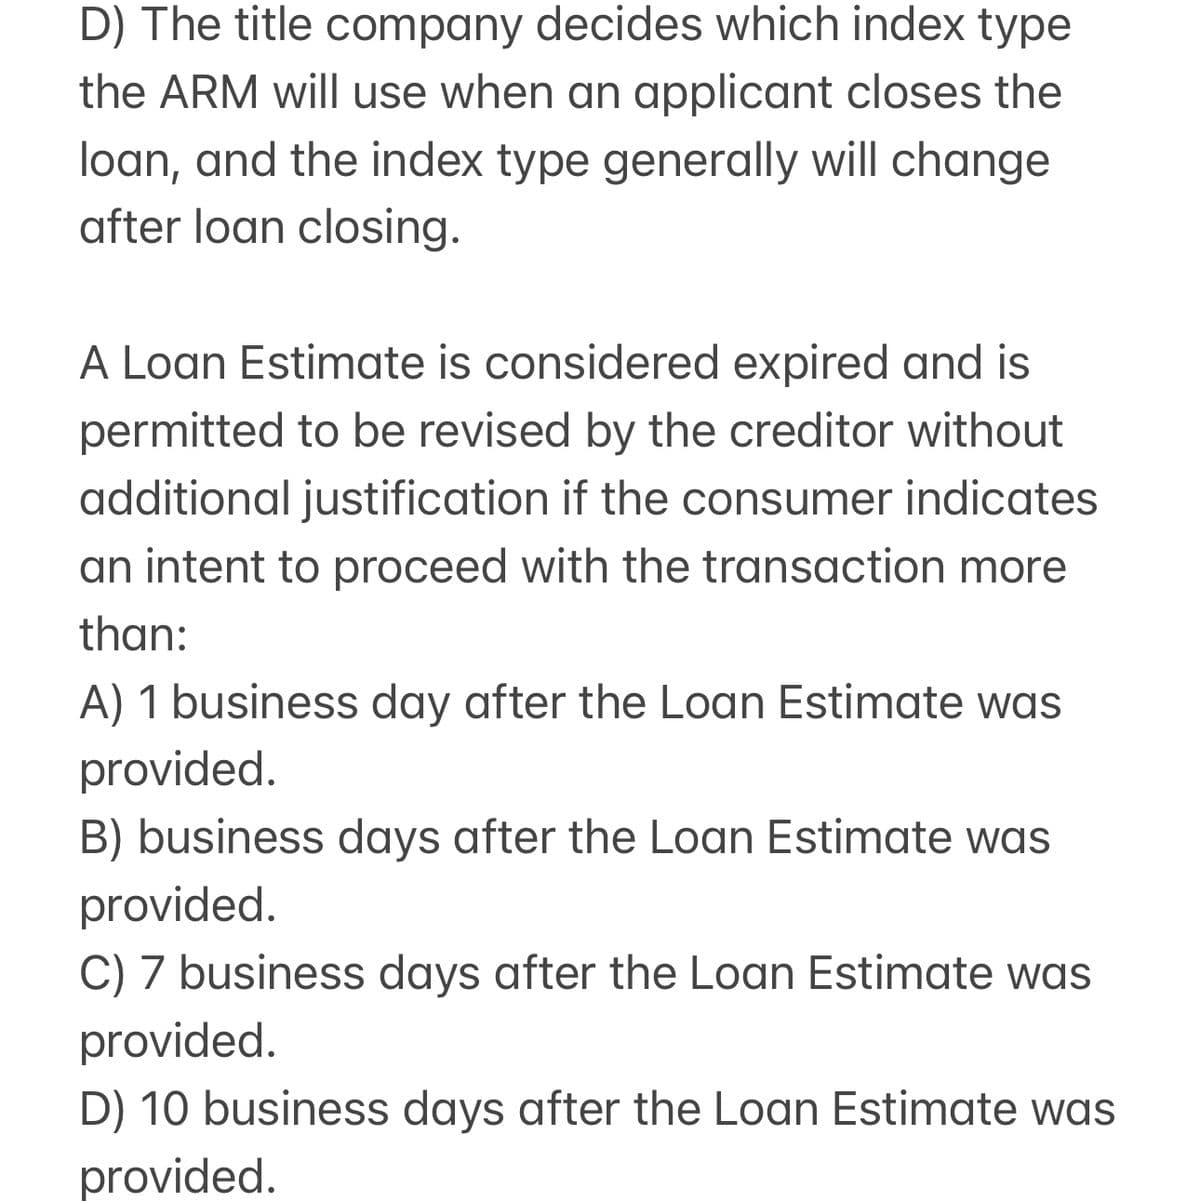 D) The title company decides which index type
the ARM will use when an applicant closes the
loan, and the index type generally will change
after loan closing.
A Loan Estimate is considered expired and is
permitted to be revised by the creditor without
additional justification if the consumer indicates
an intent to proceed with the transaction more
than:
A) 1 business day after the Loan Estimate was
provided.
B) business days after the Loan Estimate was
provided.
C) 7 business days after the Loan Estimate was
provided.
D) 10 business days after the Loan Estimate was
provided.